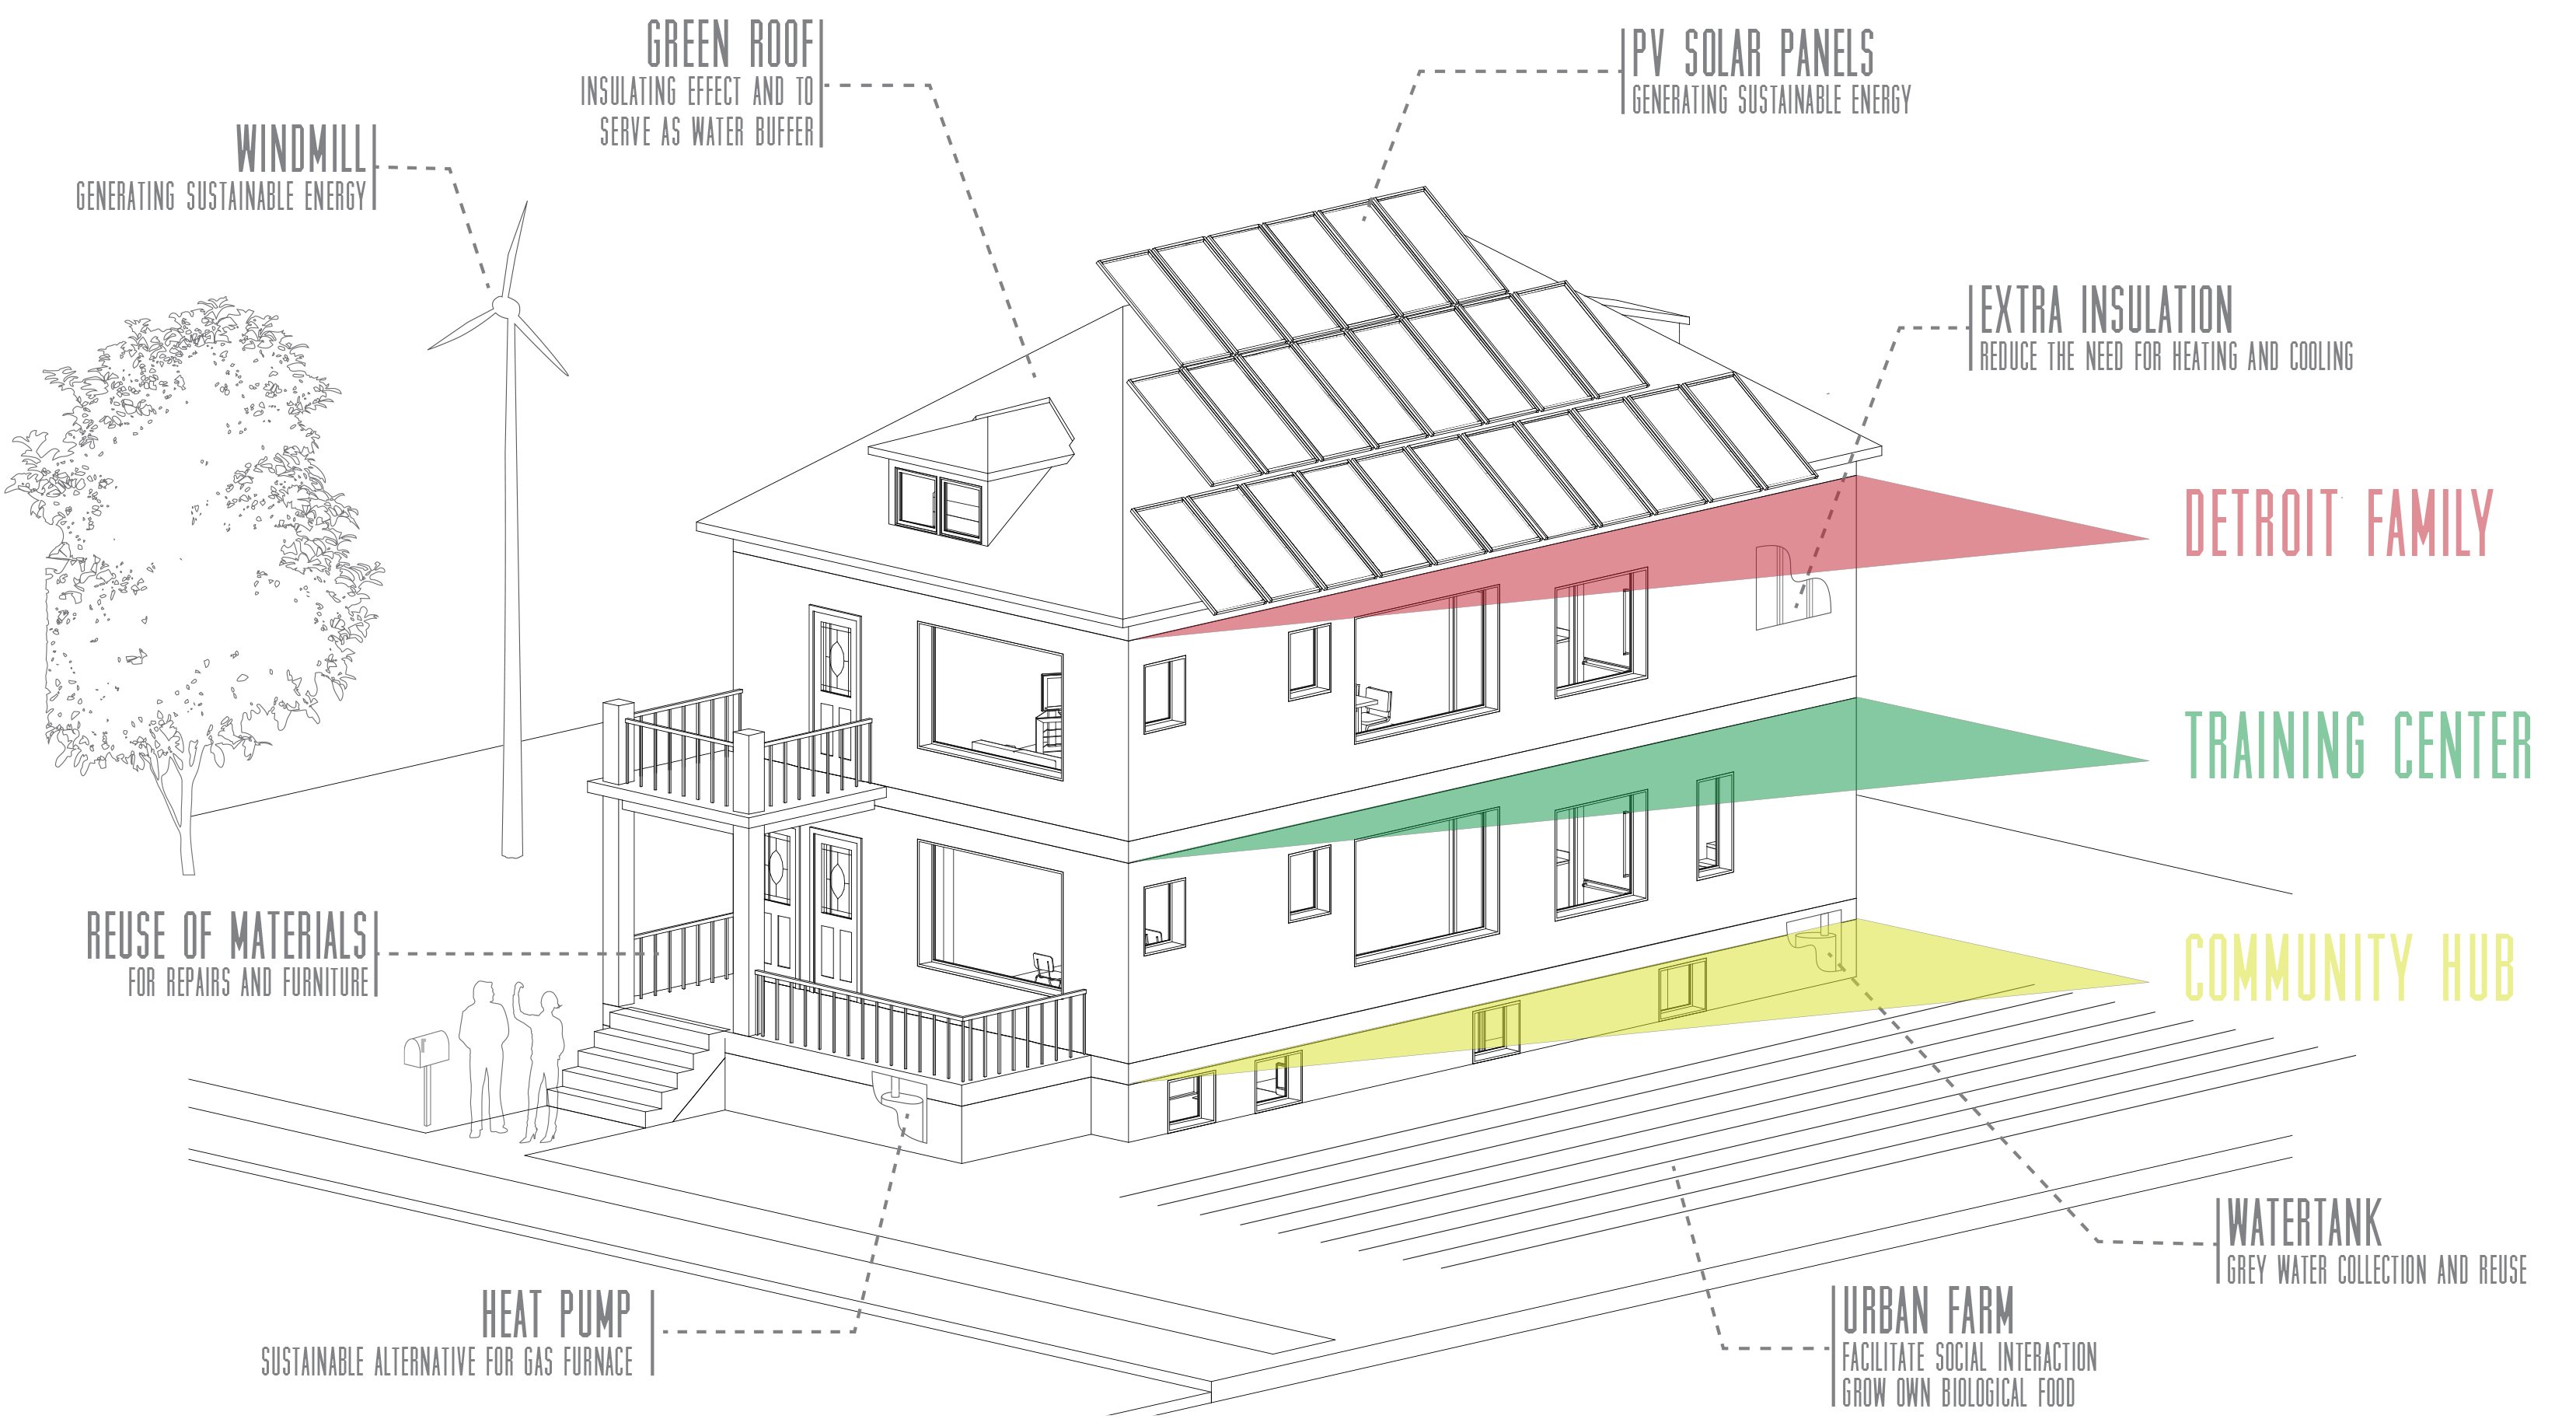 The Motown Sustainable Housing